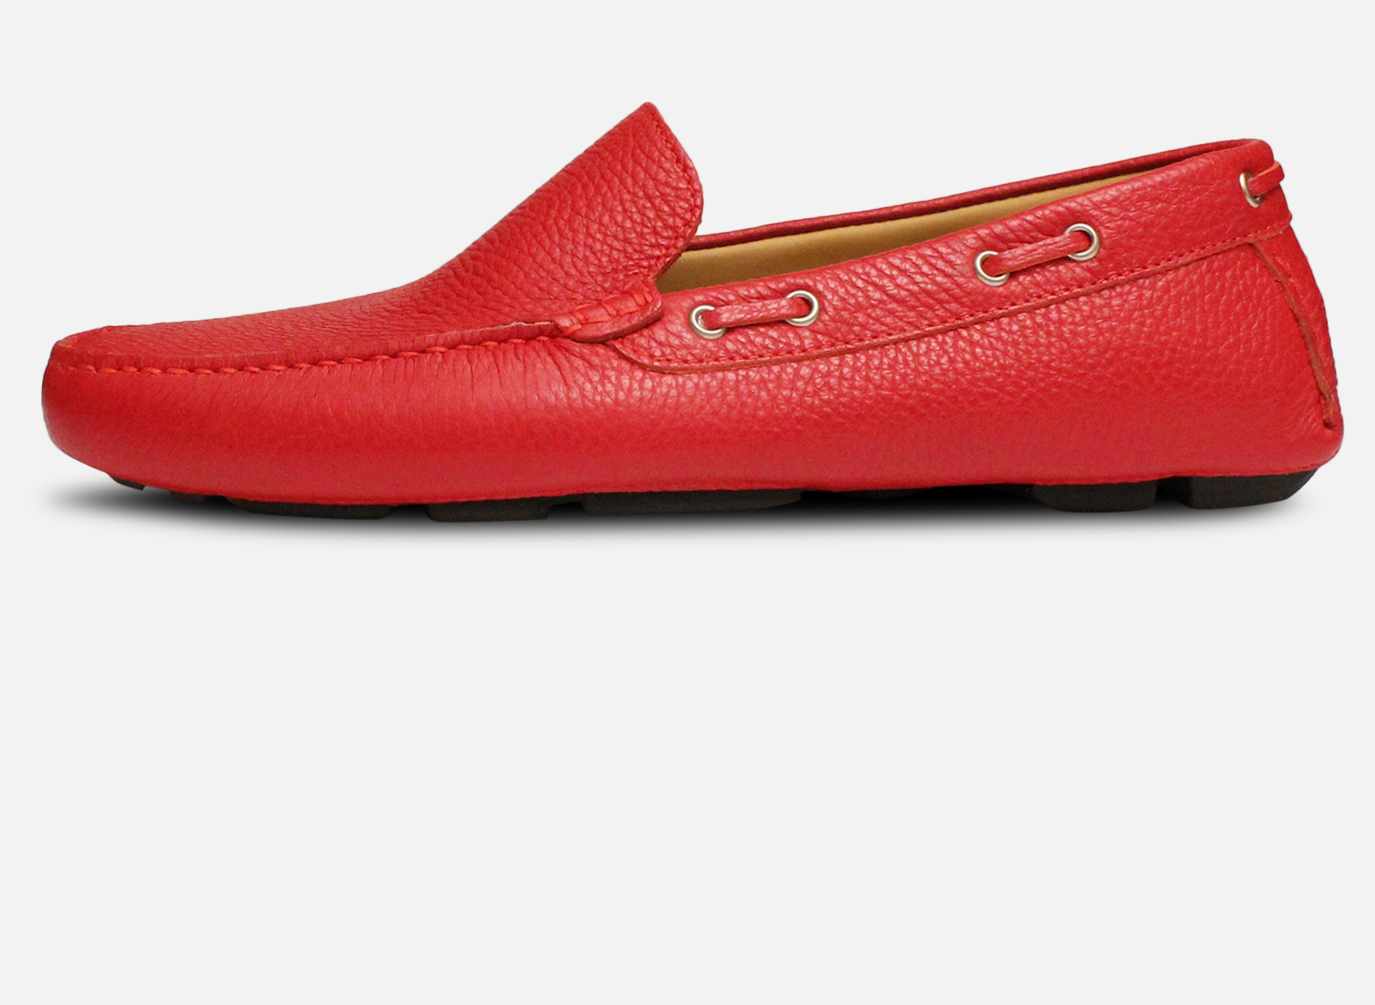 Arthur Knight Red Leather Italian Driving Shoe Moccasins